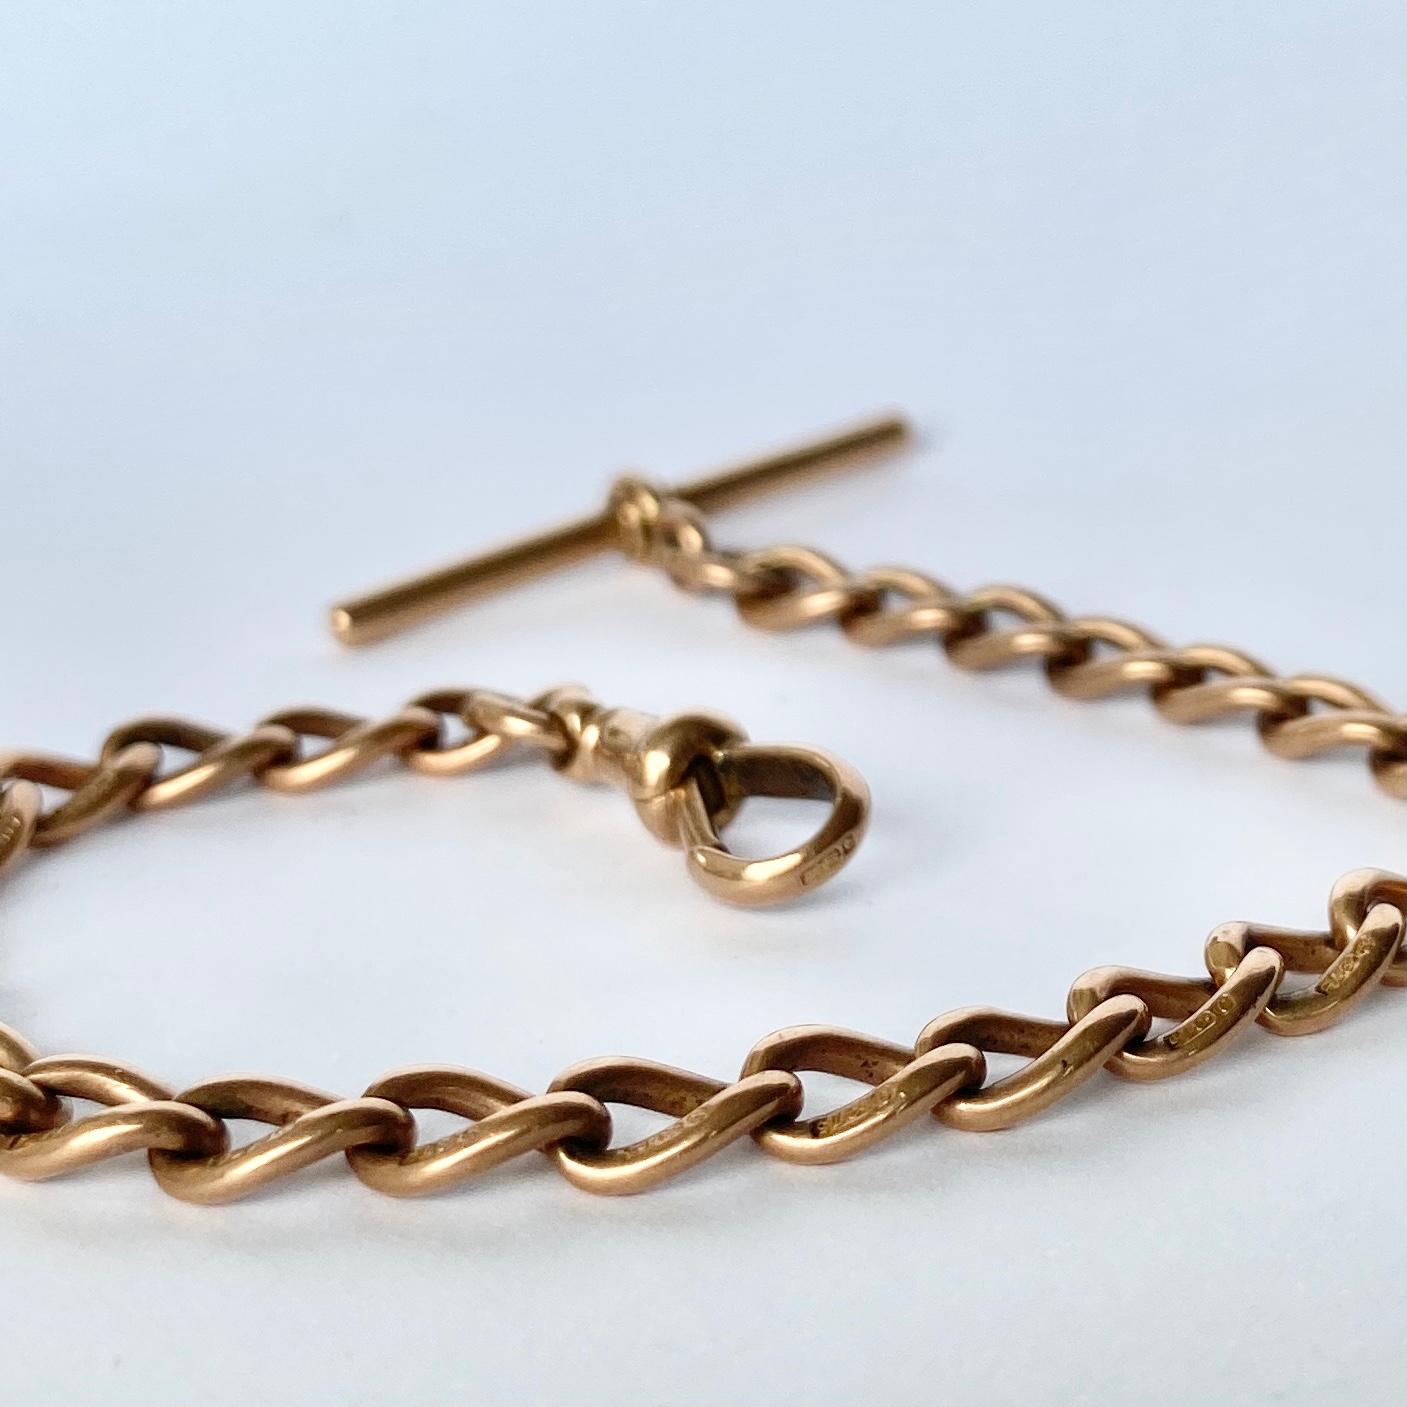 This glossy 9carat gold bracelet is made of solid gold and features a dog clip one end and a t-bar on the other.  Every curb link is hallmaked.

Length: 19.5cm
Width: 6mm

Weight: 14.3g